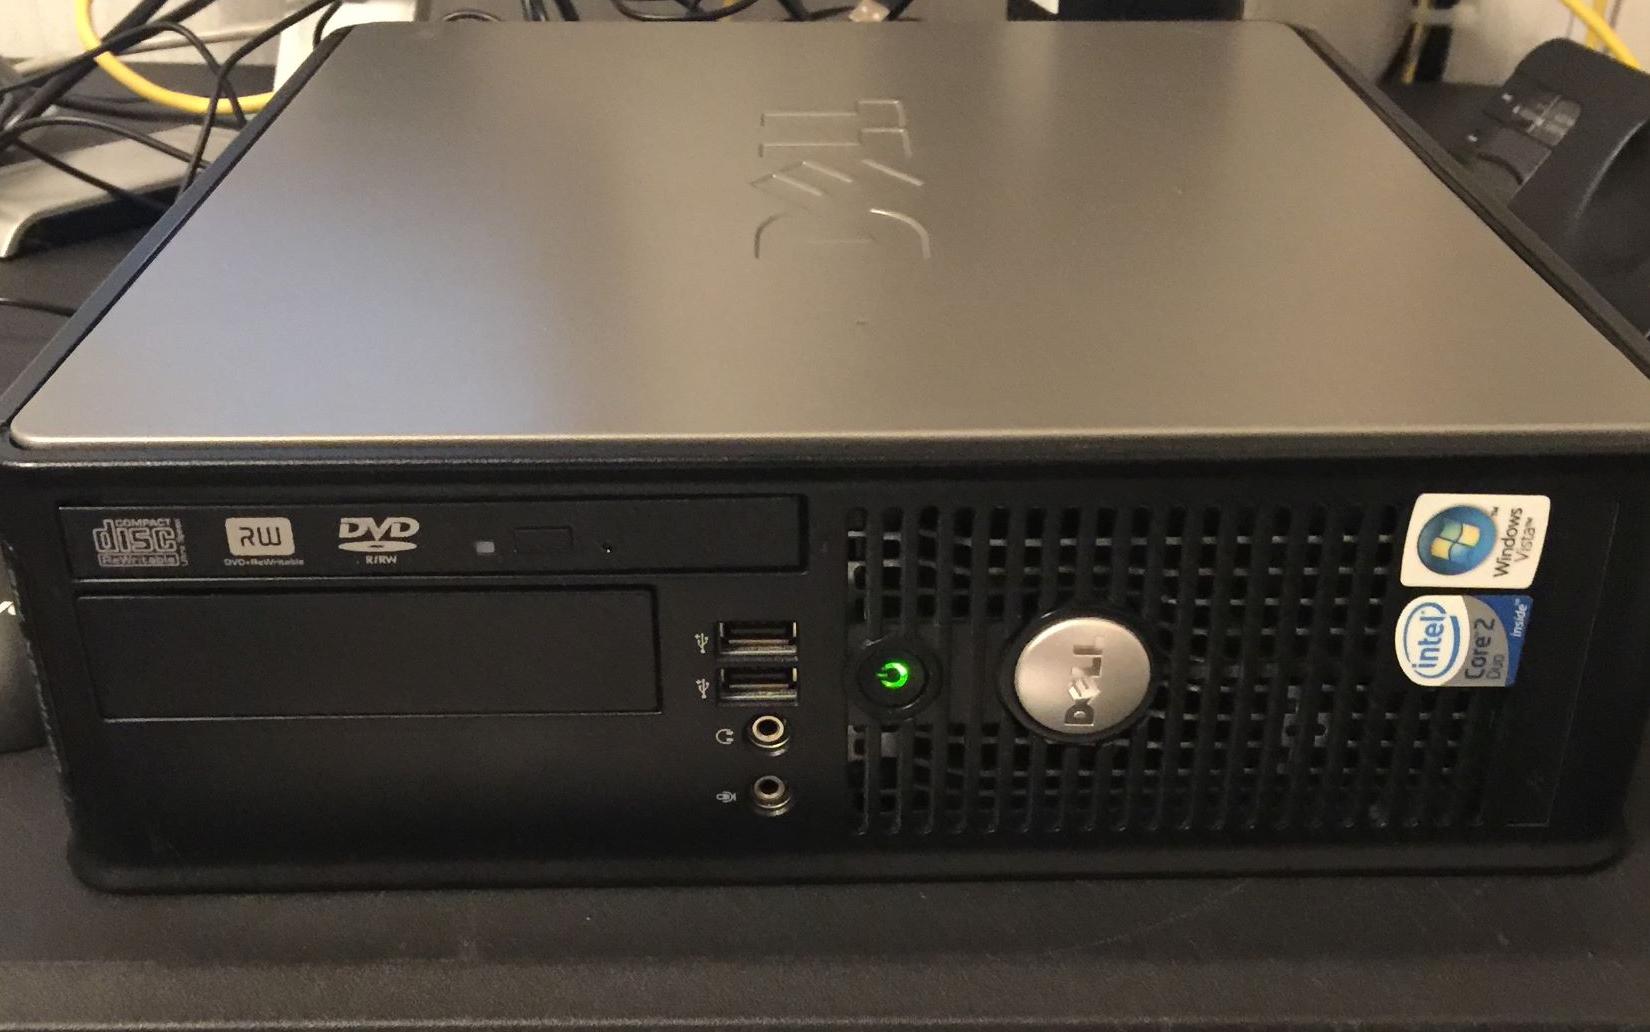 Dell Optiplex 745 with 250gb Hard Drive, 5gb Ram, running at 2.4ghtz and a Fresh Install of Window 10 Pro.  $60